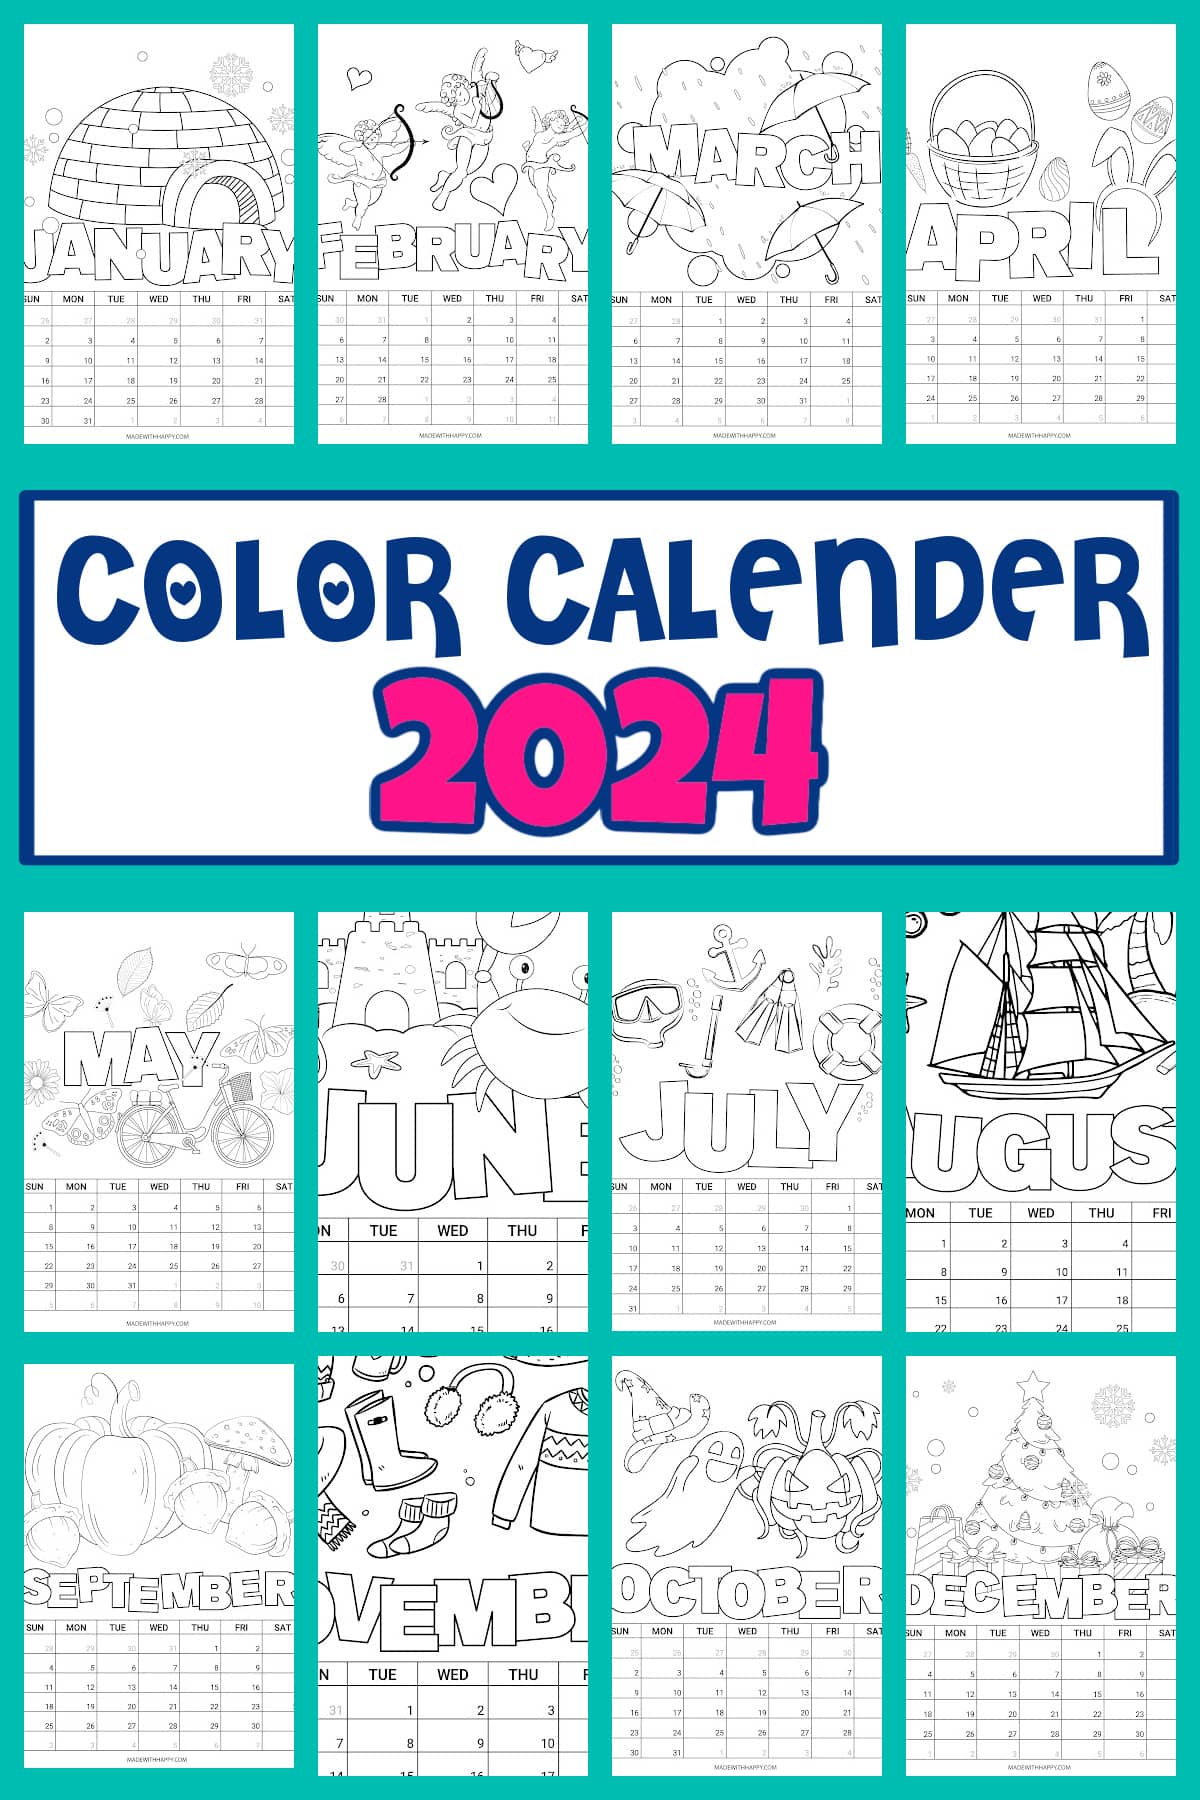 2024 Free Calendars To Print By Month Printable Coloring Holidays